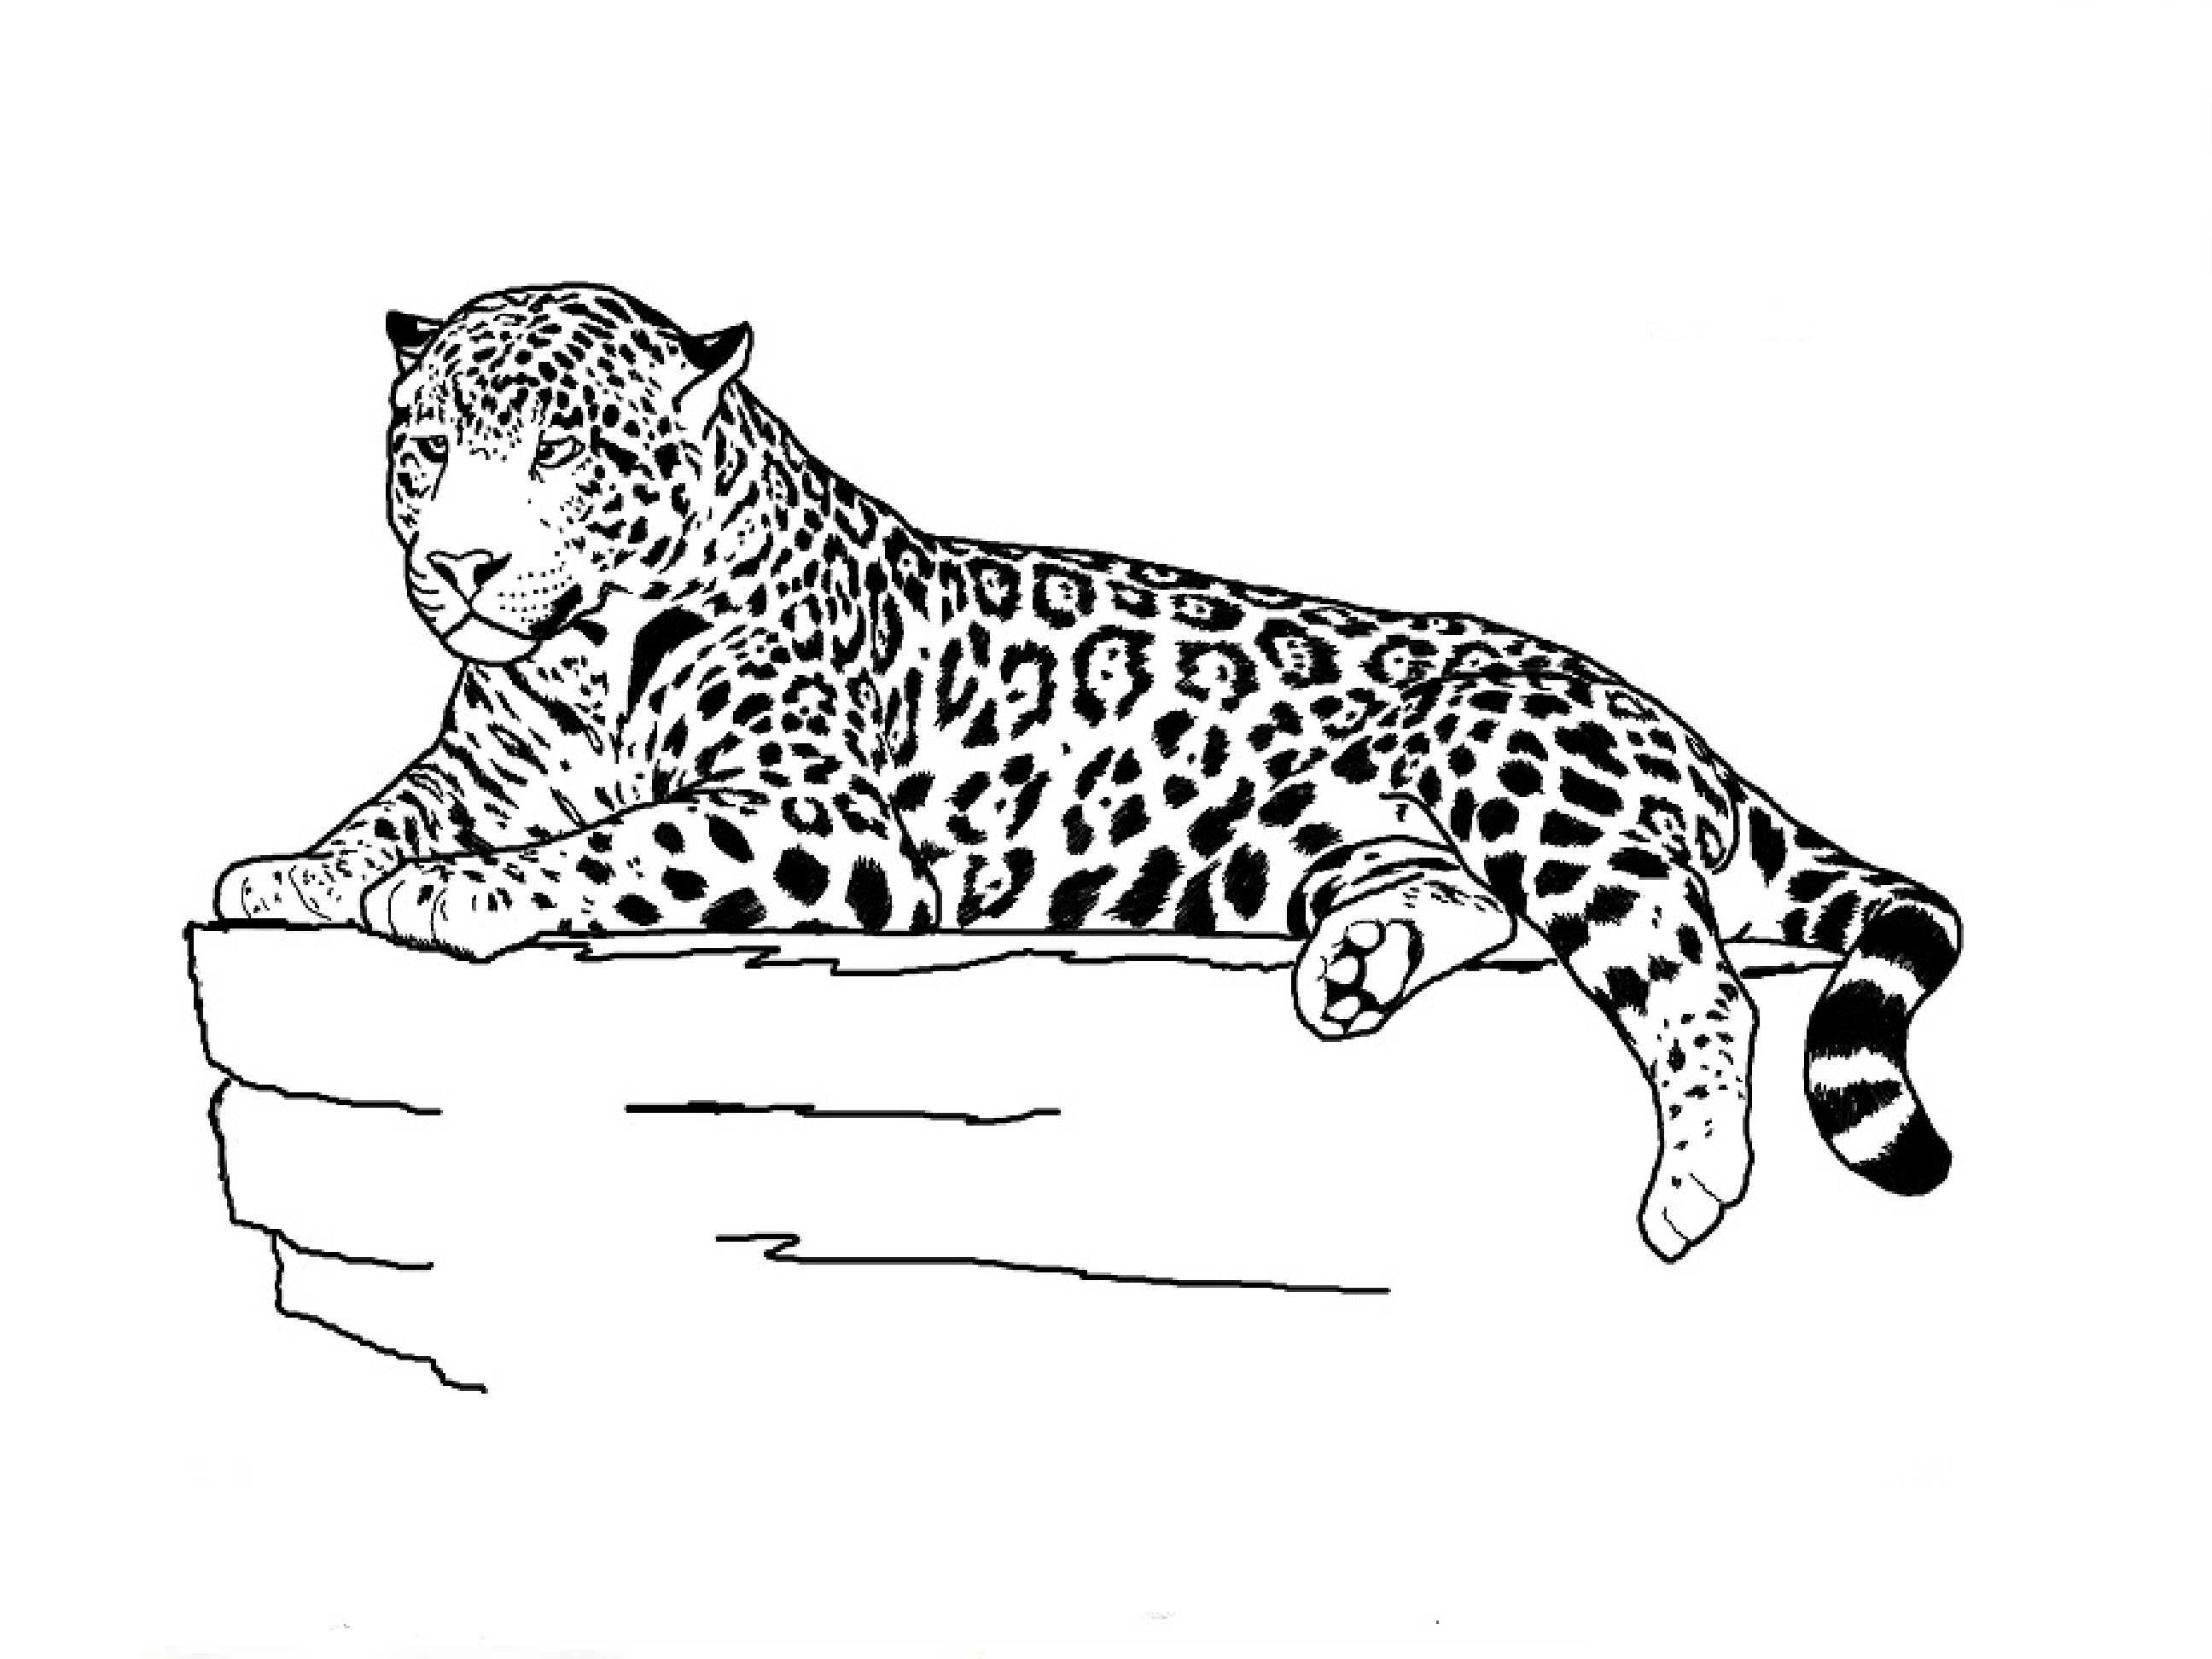 Jaguar Animal Sketch at Explore collection of